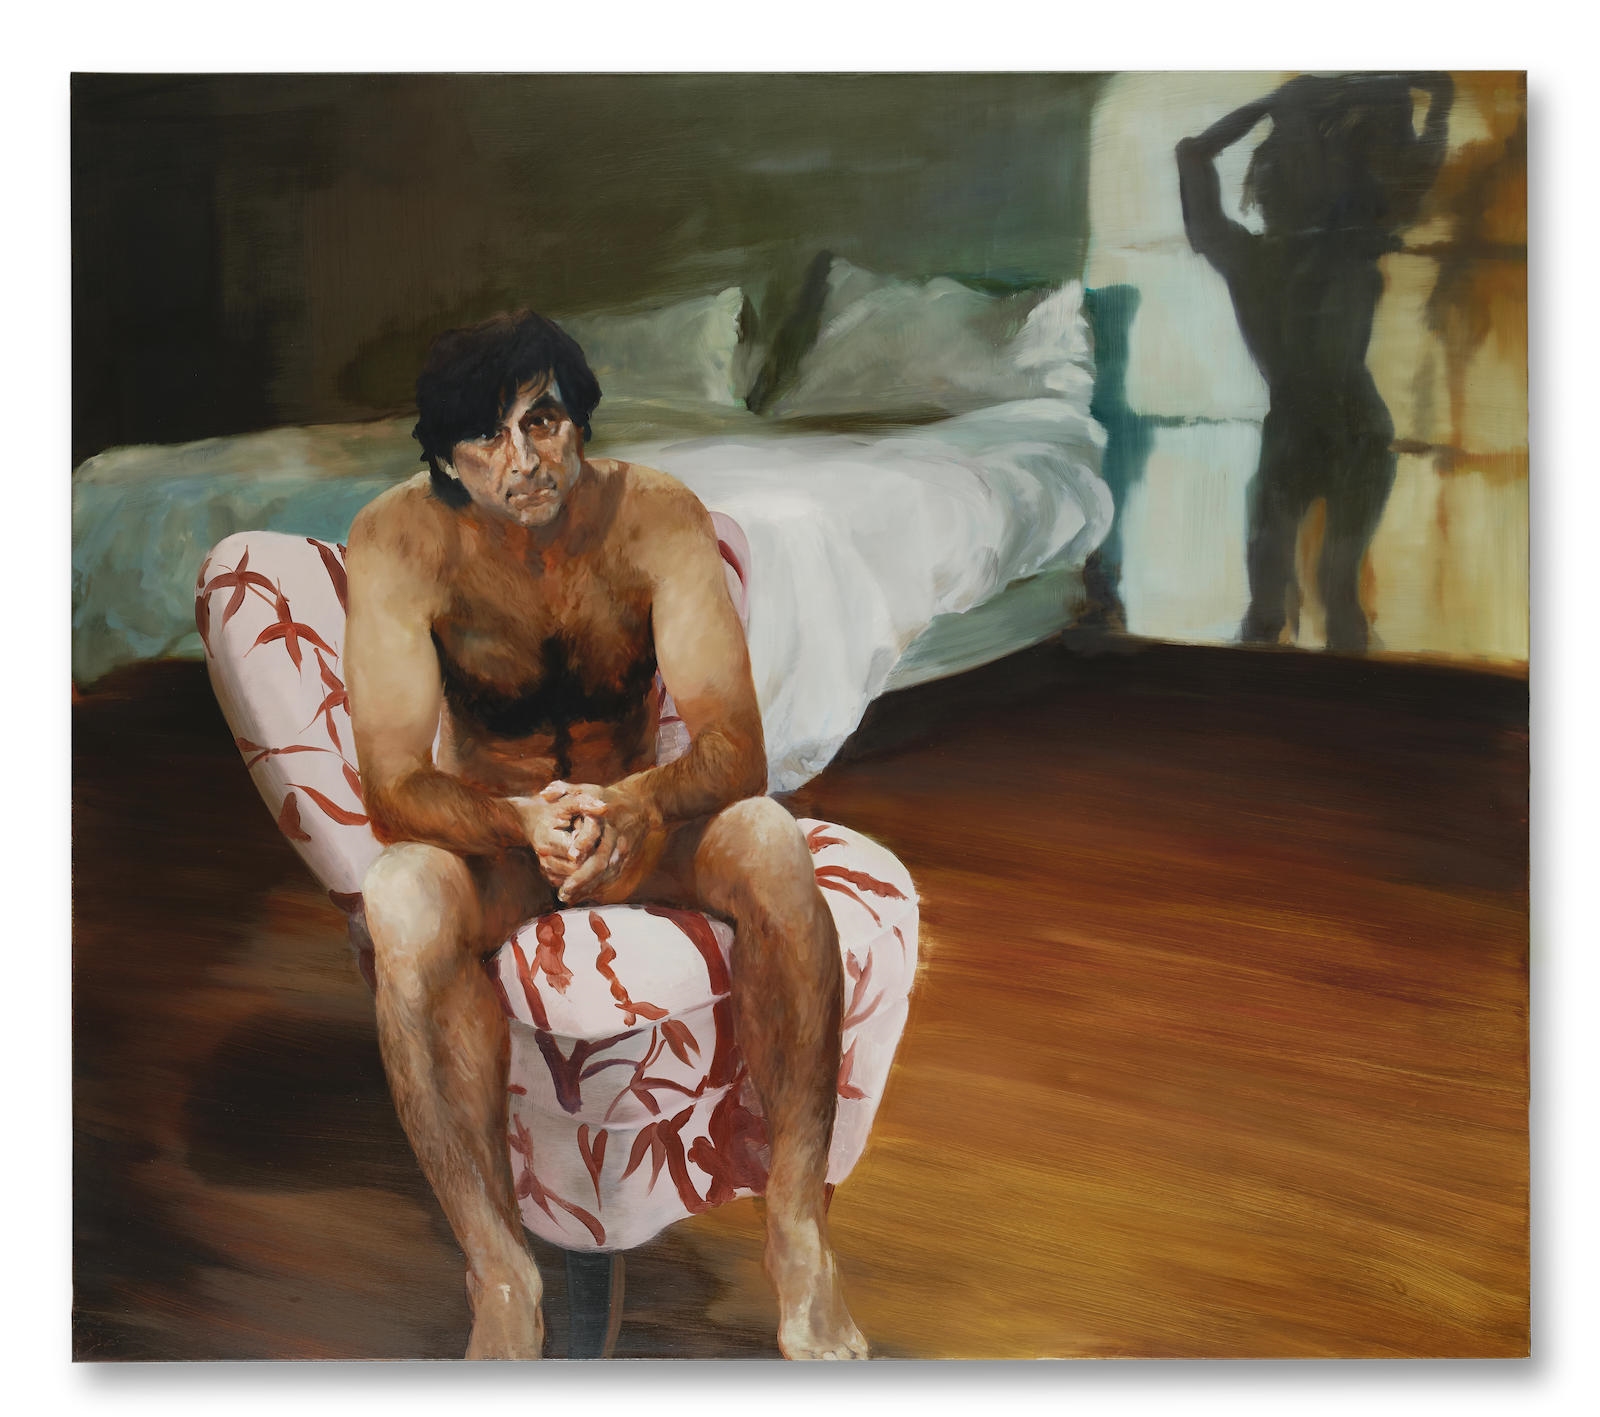 The Bed by Eric Fischl, 2000